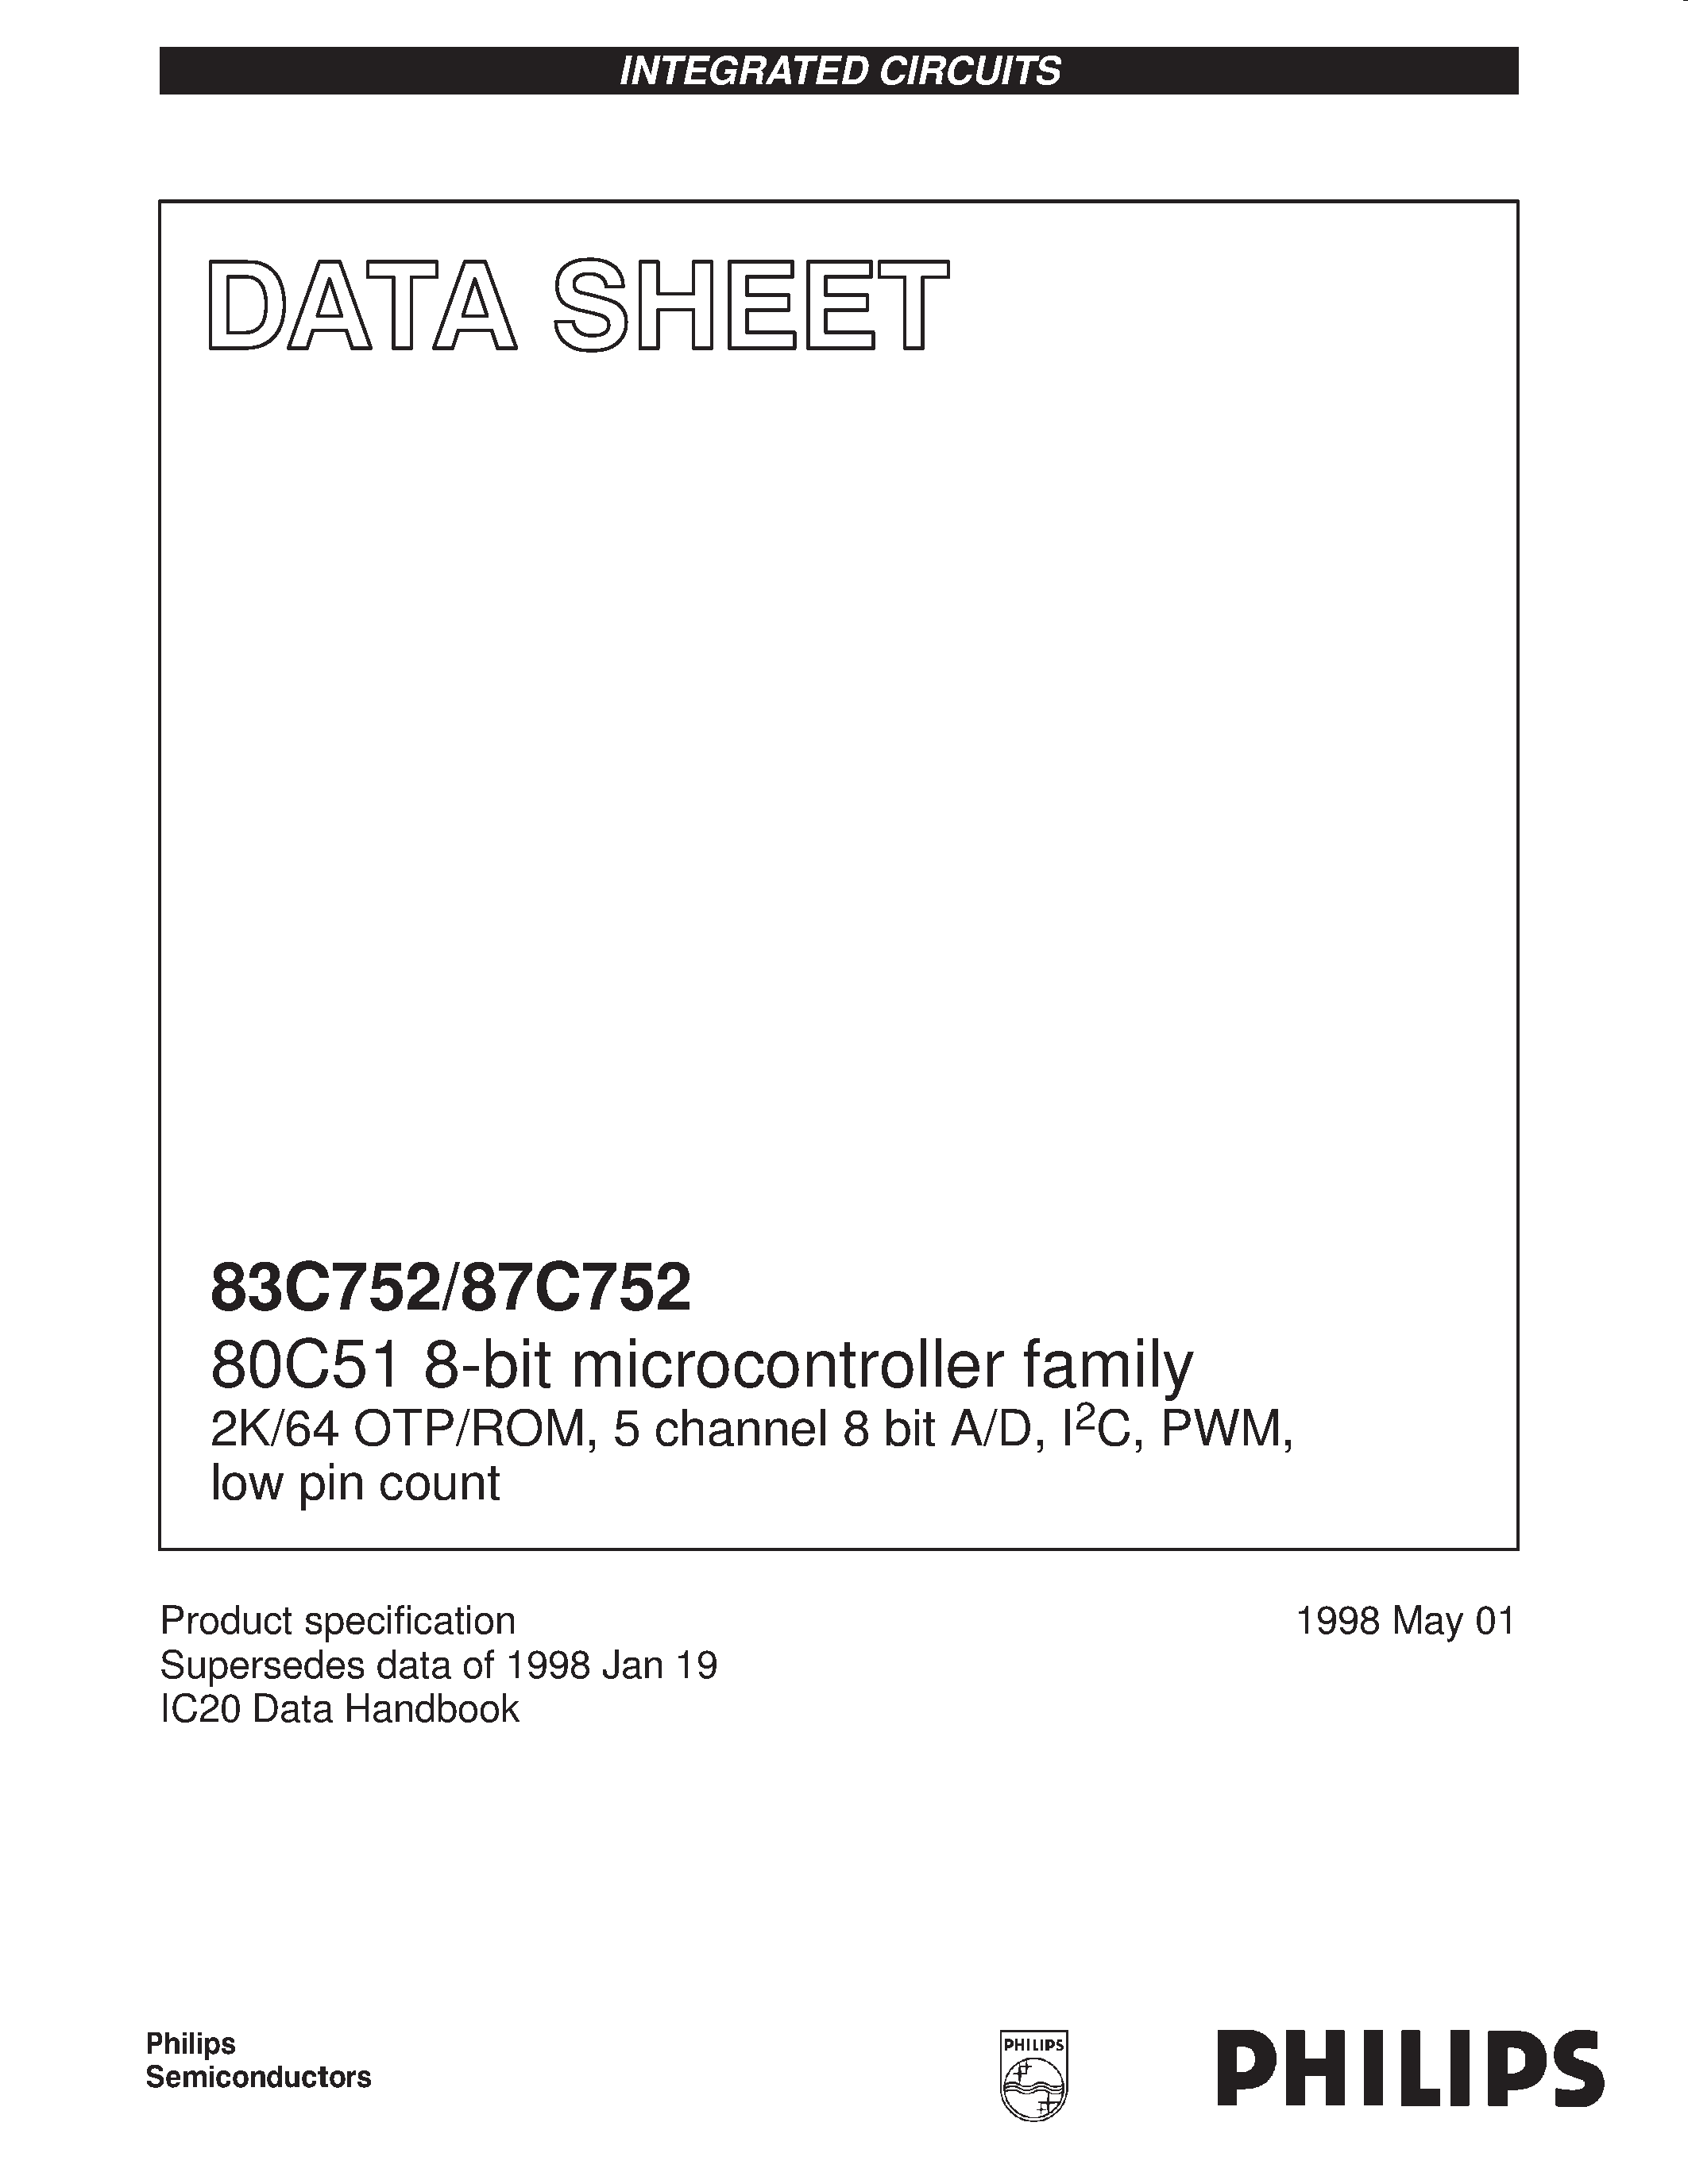 Datasheet S87C752-2N28 - 80C51 8-bit microcontroller family 2K/64 OTP/ROM / 5 channel 8 bit A/D / I2C / PWM / low pin count page 1